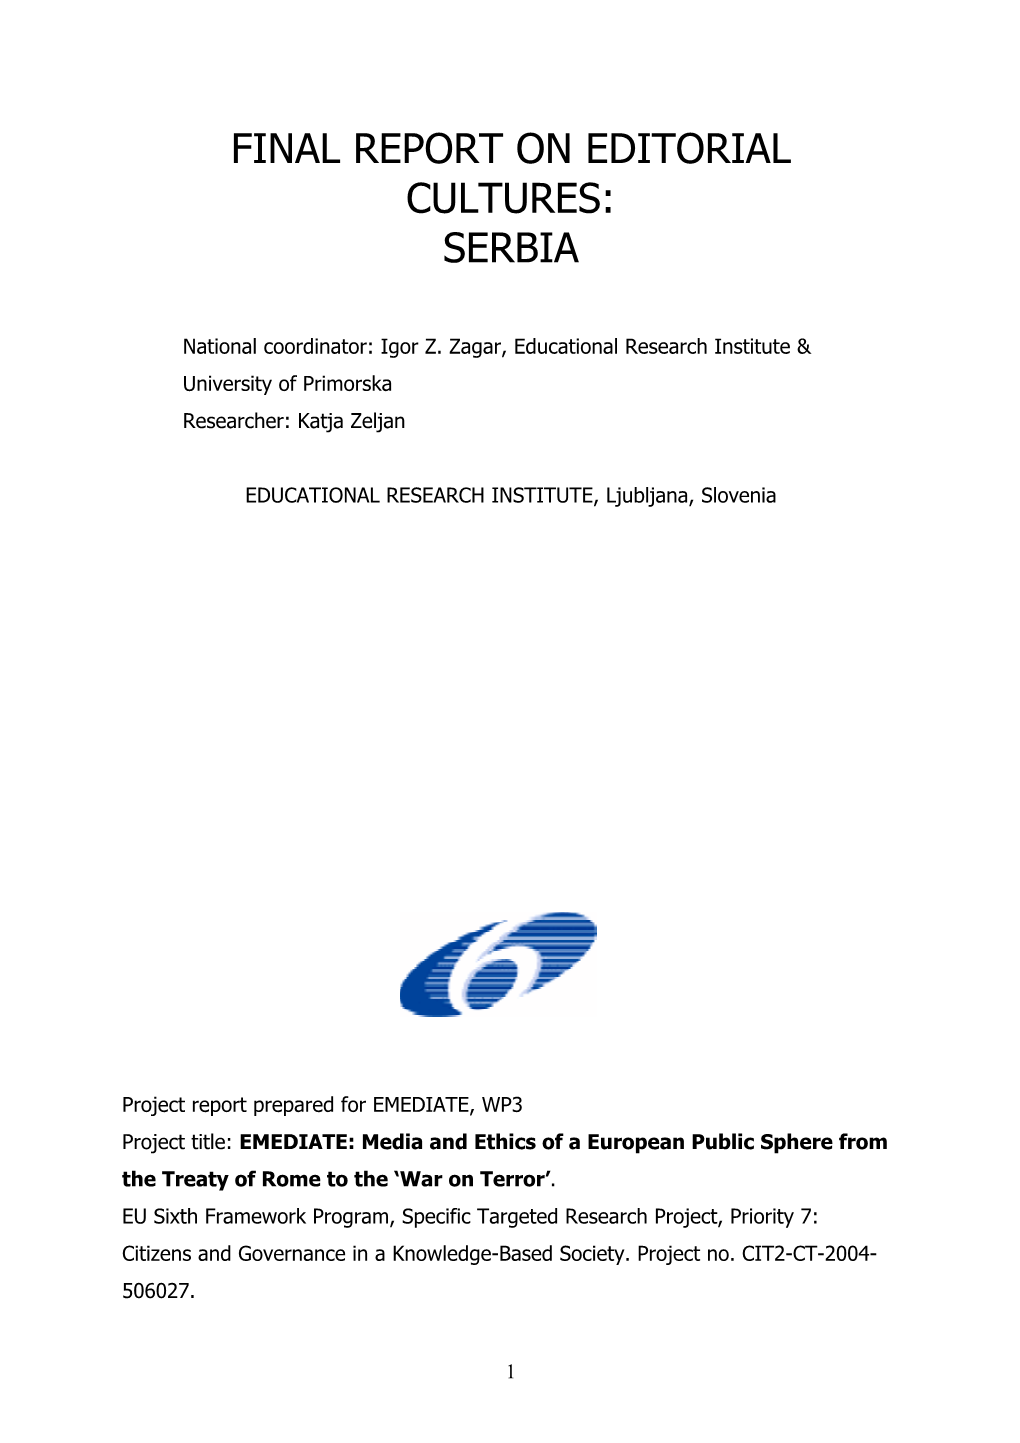 Final Report on Editorial Cultures: Serbia